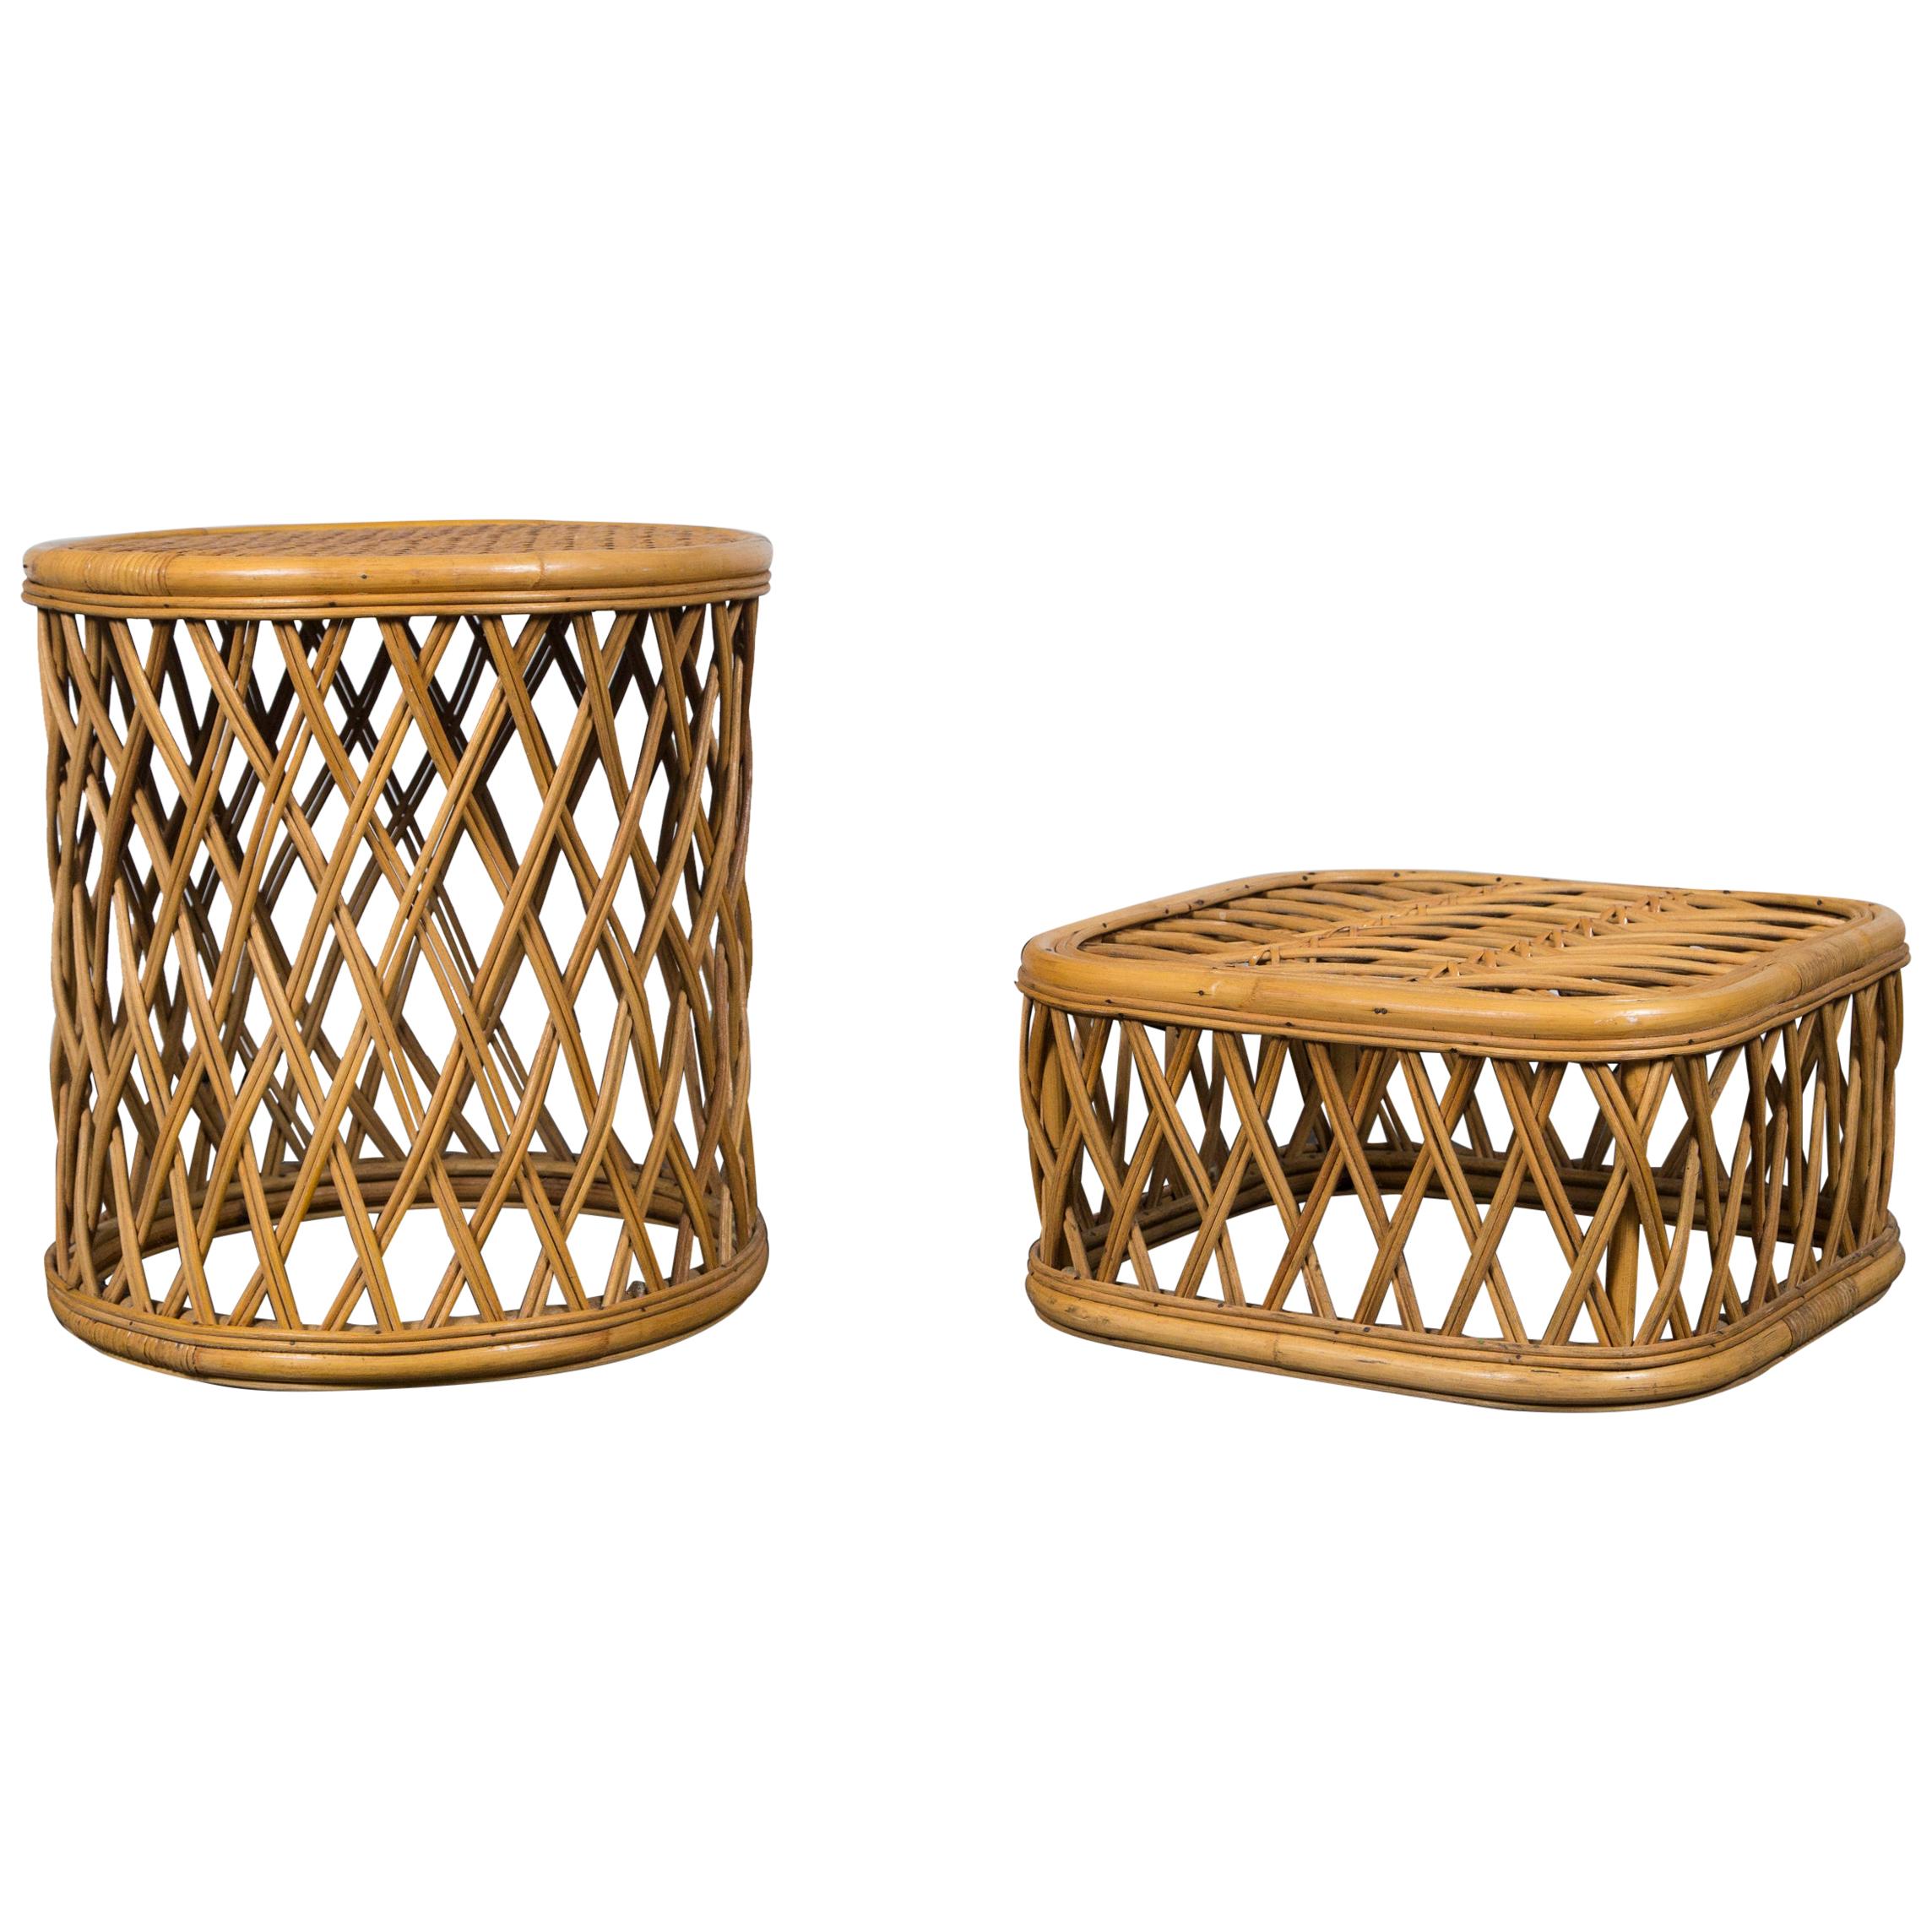 Two Rattan Pieces Small Cylindrical Table, Small Square Ottoman